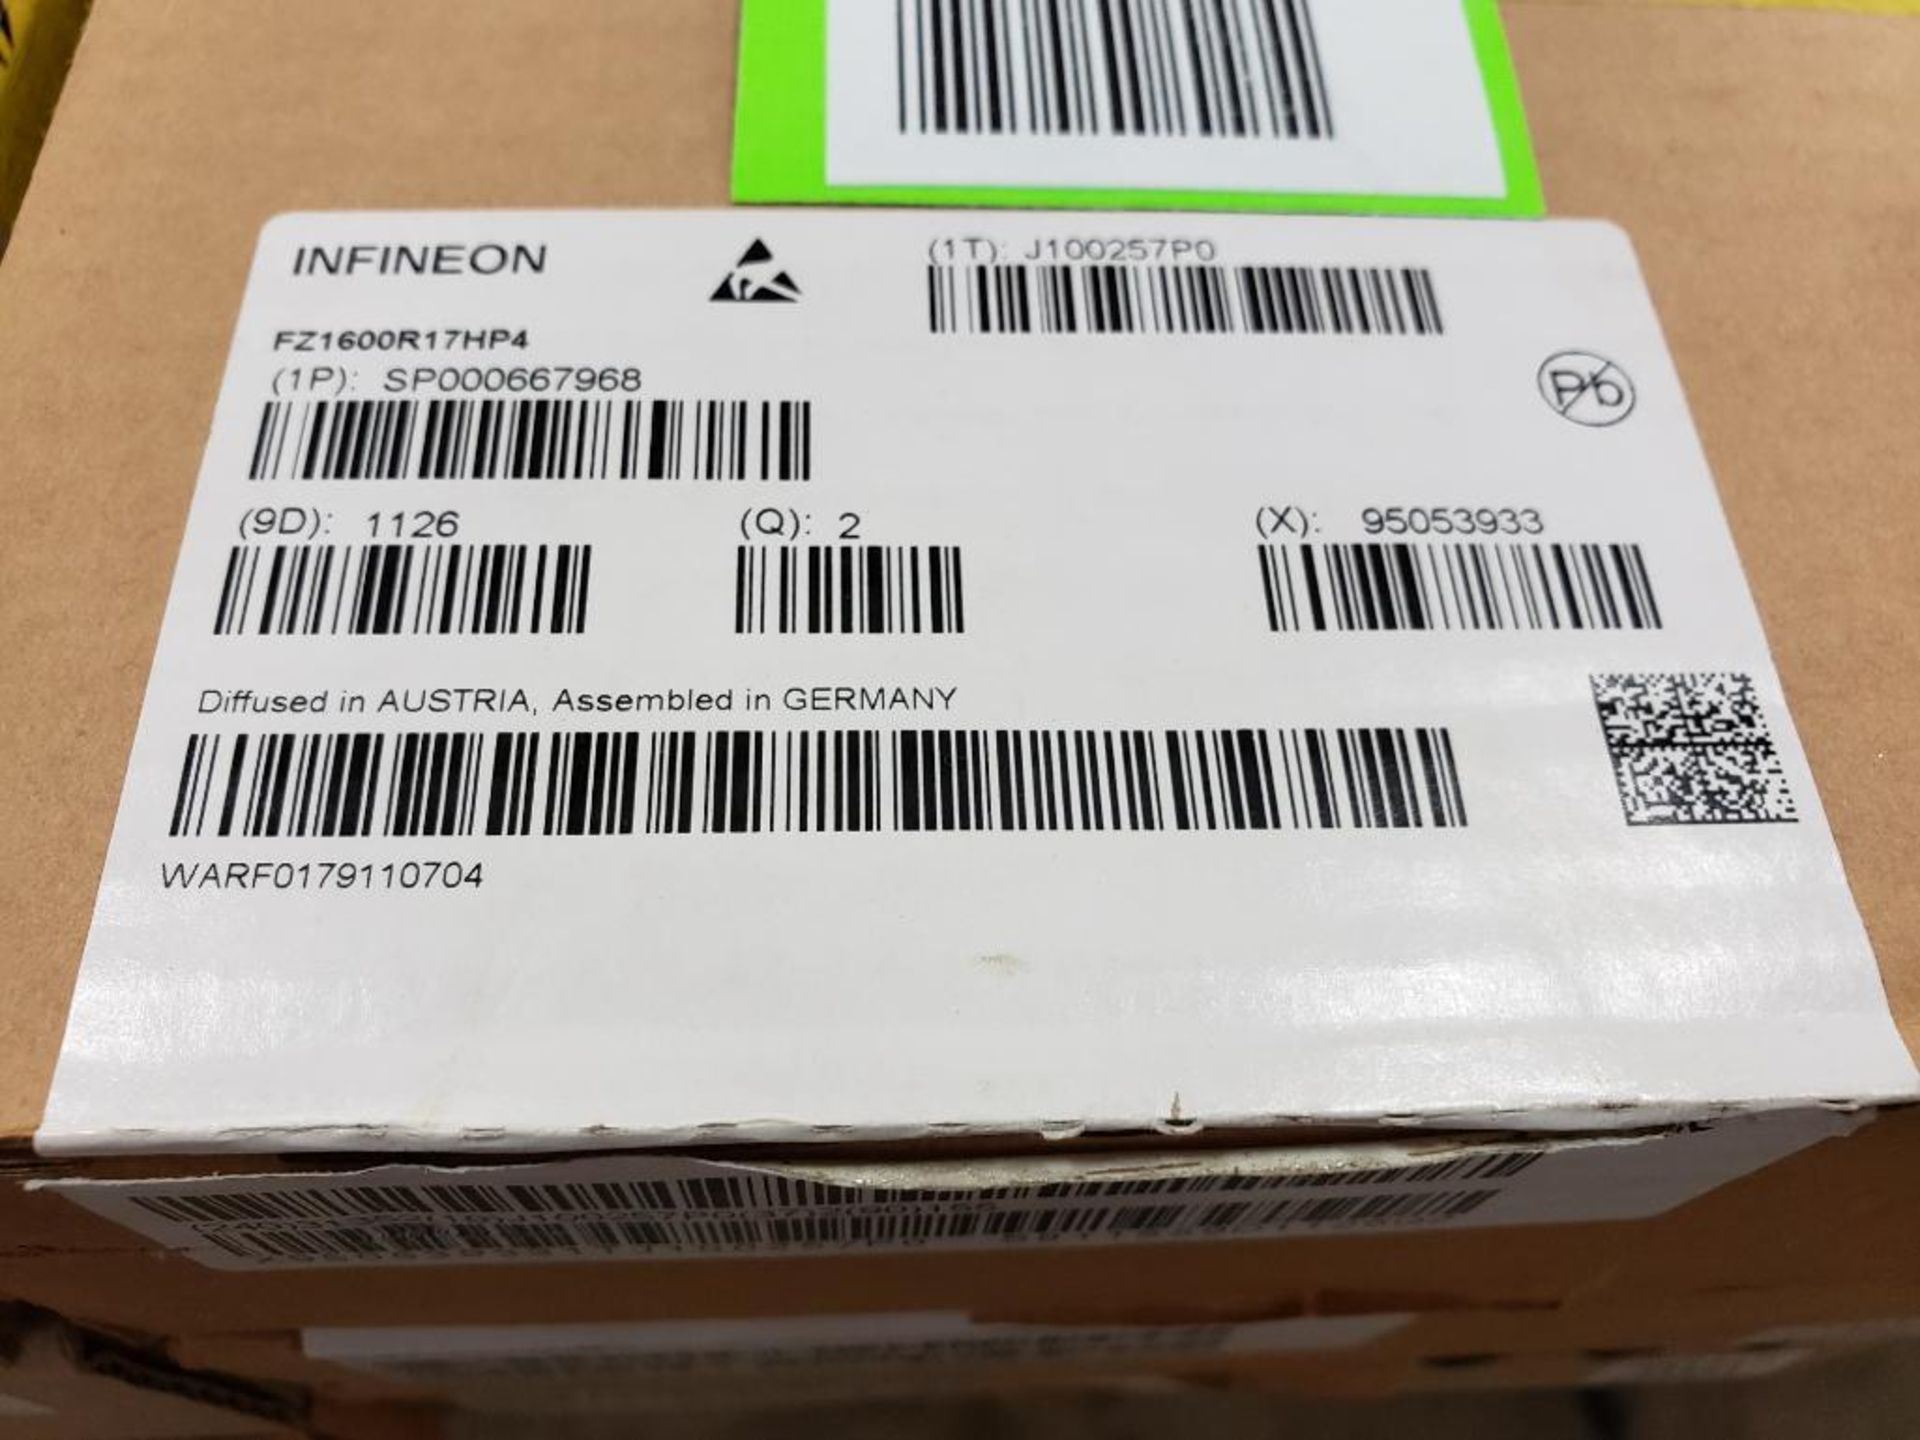 Qty 6 - Infineon semiconductor units. Part number FZ1600R17HP4. Boxed 2 per box bulk. New in box. - Image 3 of 3